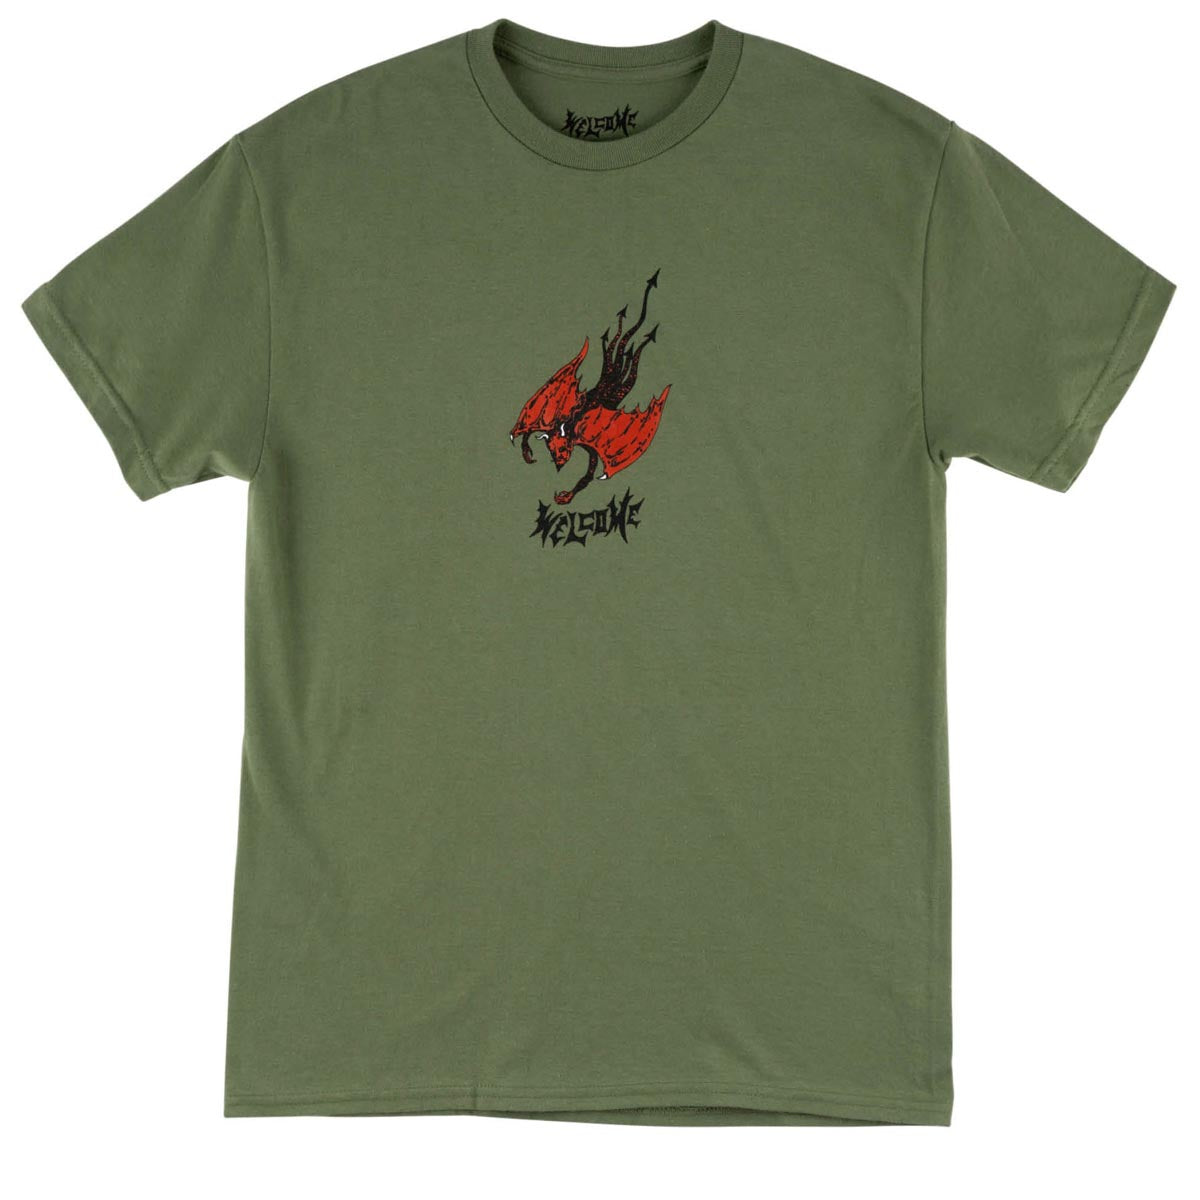 Welcome Diver T-Shirt - Military image 1